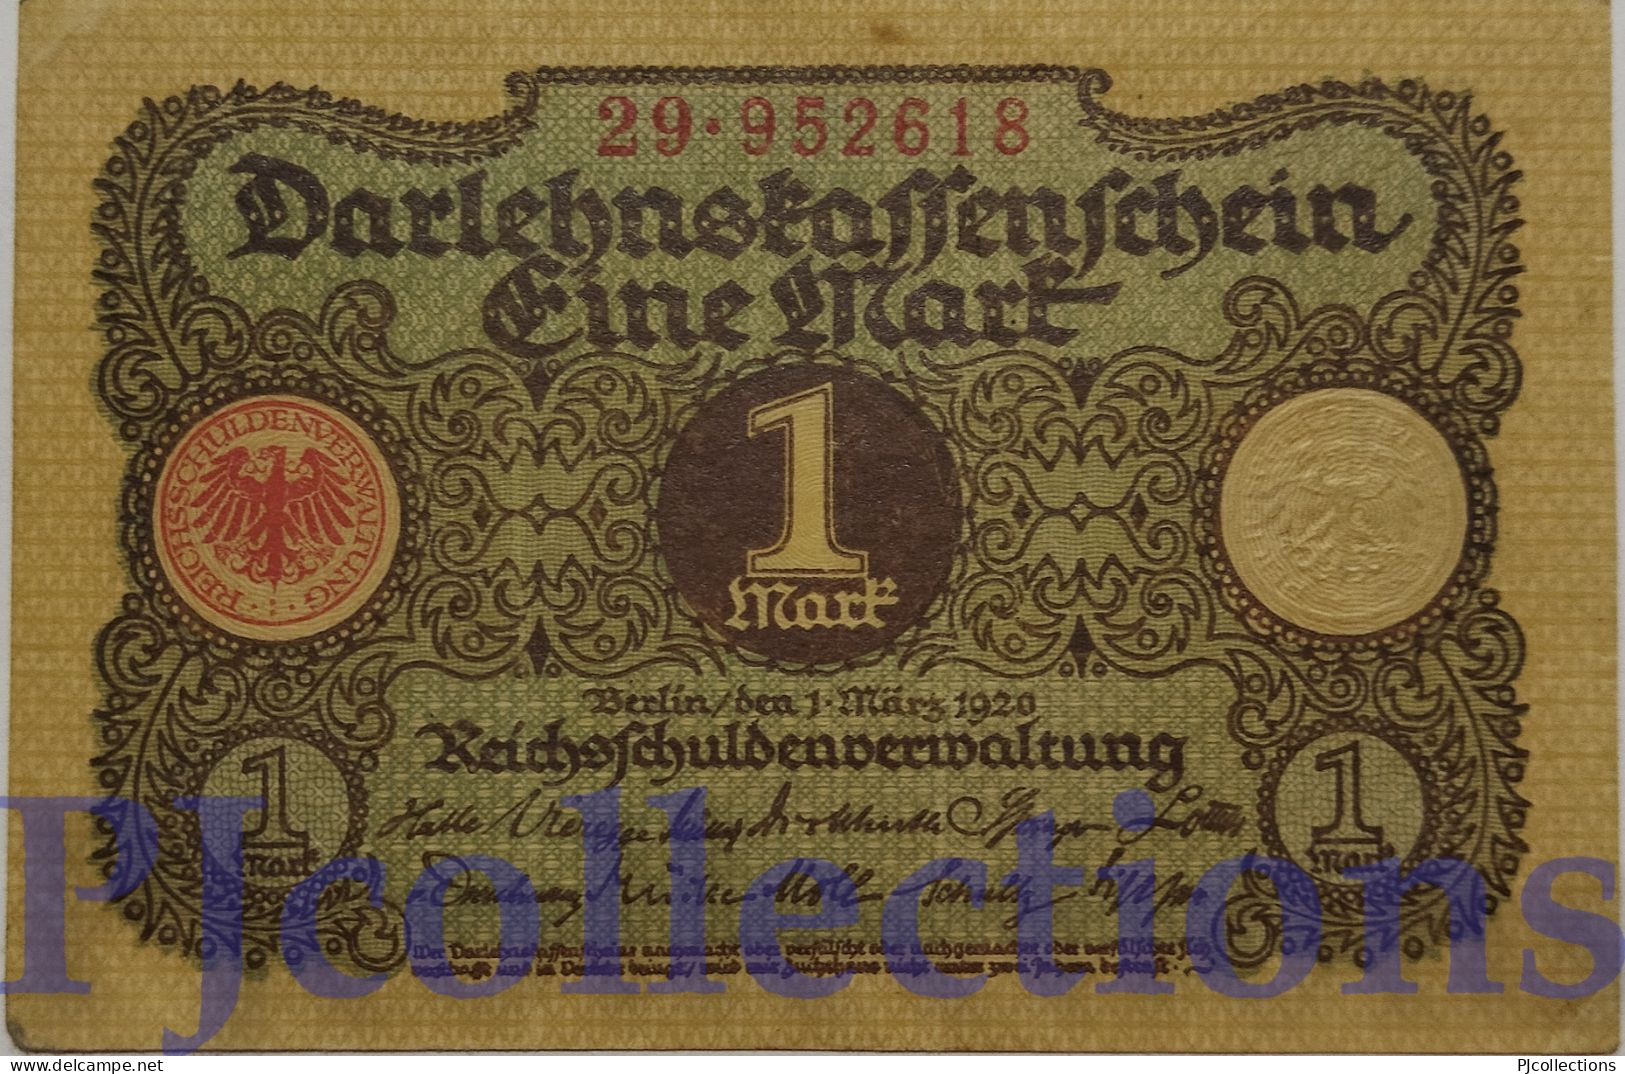 GERMANY 1 MARK 1920 PICK 58 XF - Imperial Debt Administration